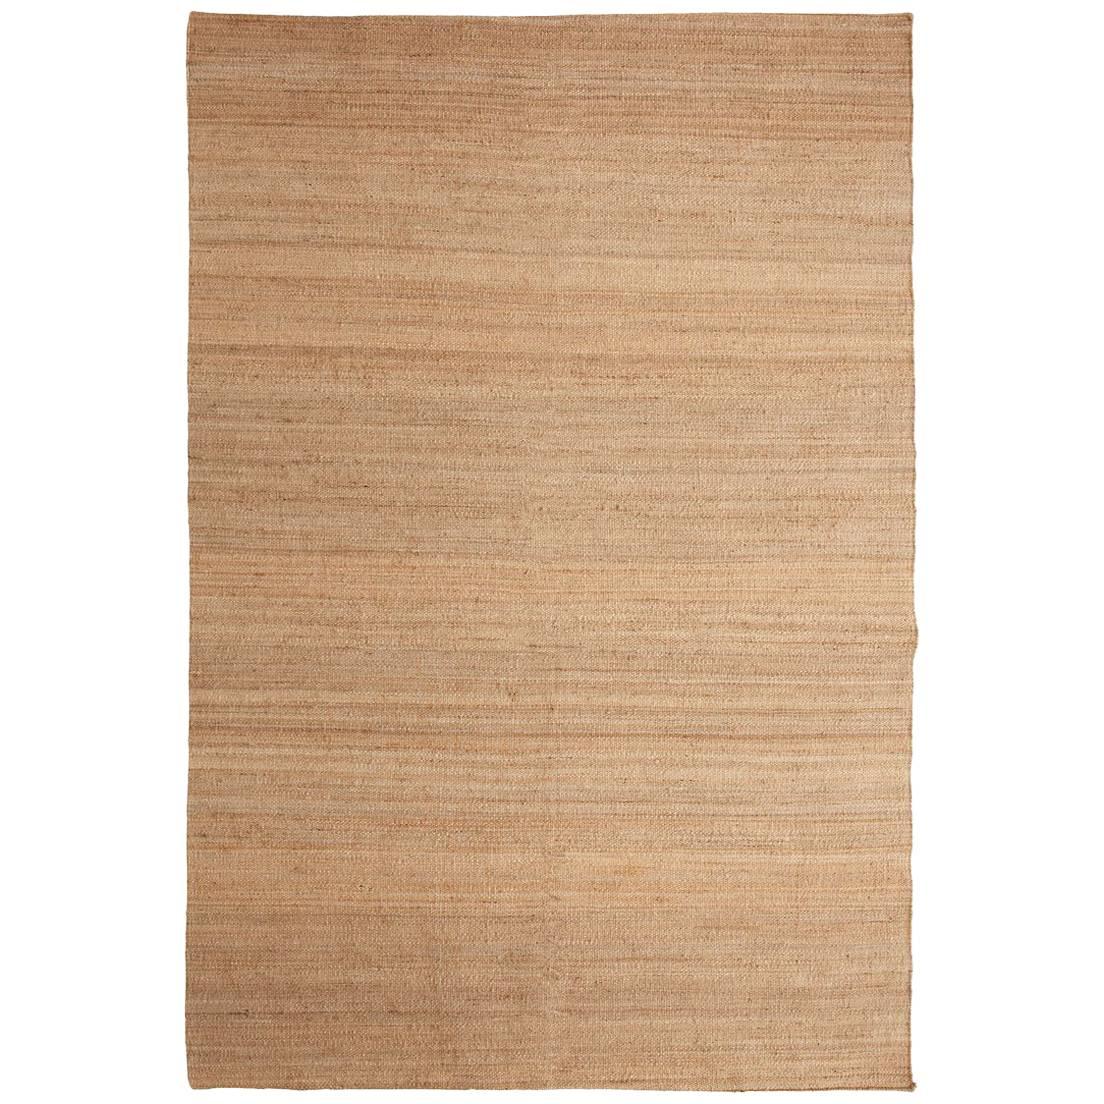 Vegetal Natural Hand-Loomed Jute Rug by Nani Marquina & Ariadna Miquel, Medium For Sale